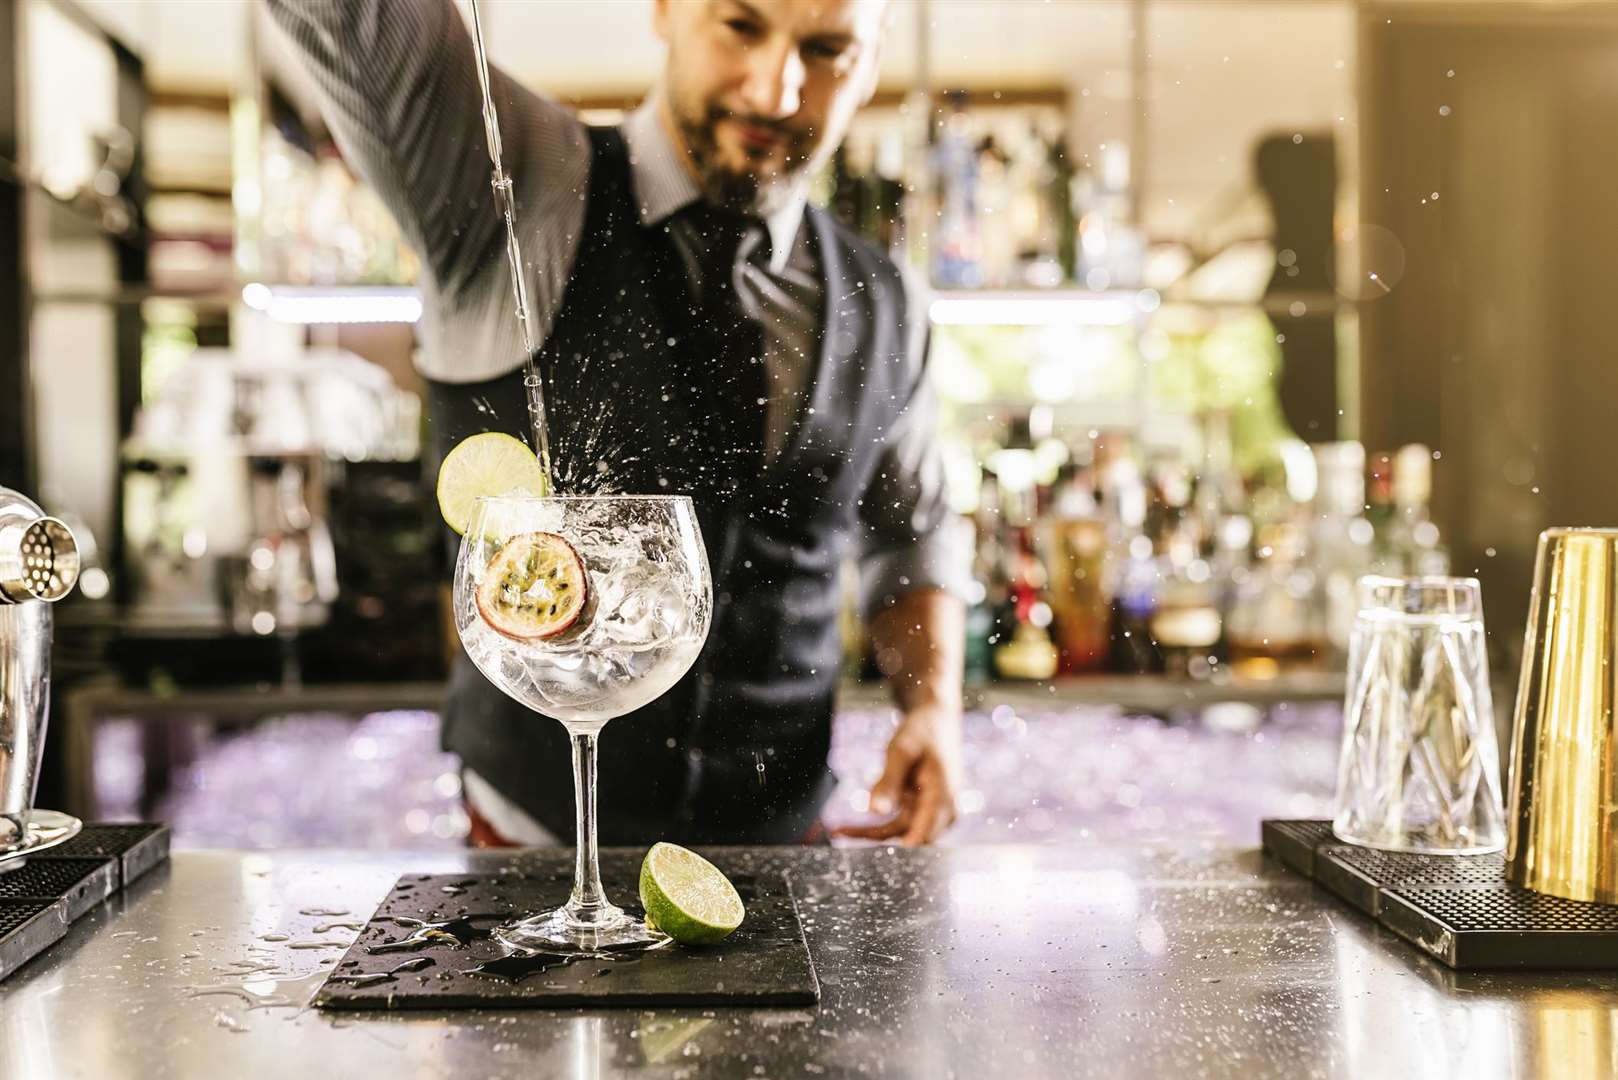 World Gin Day is on Saturday